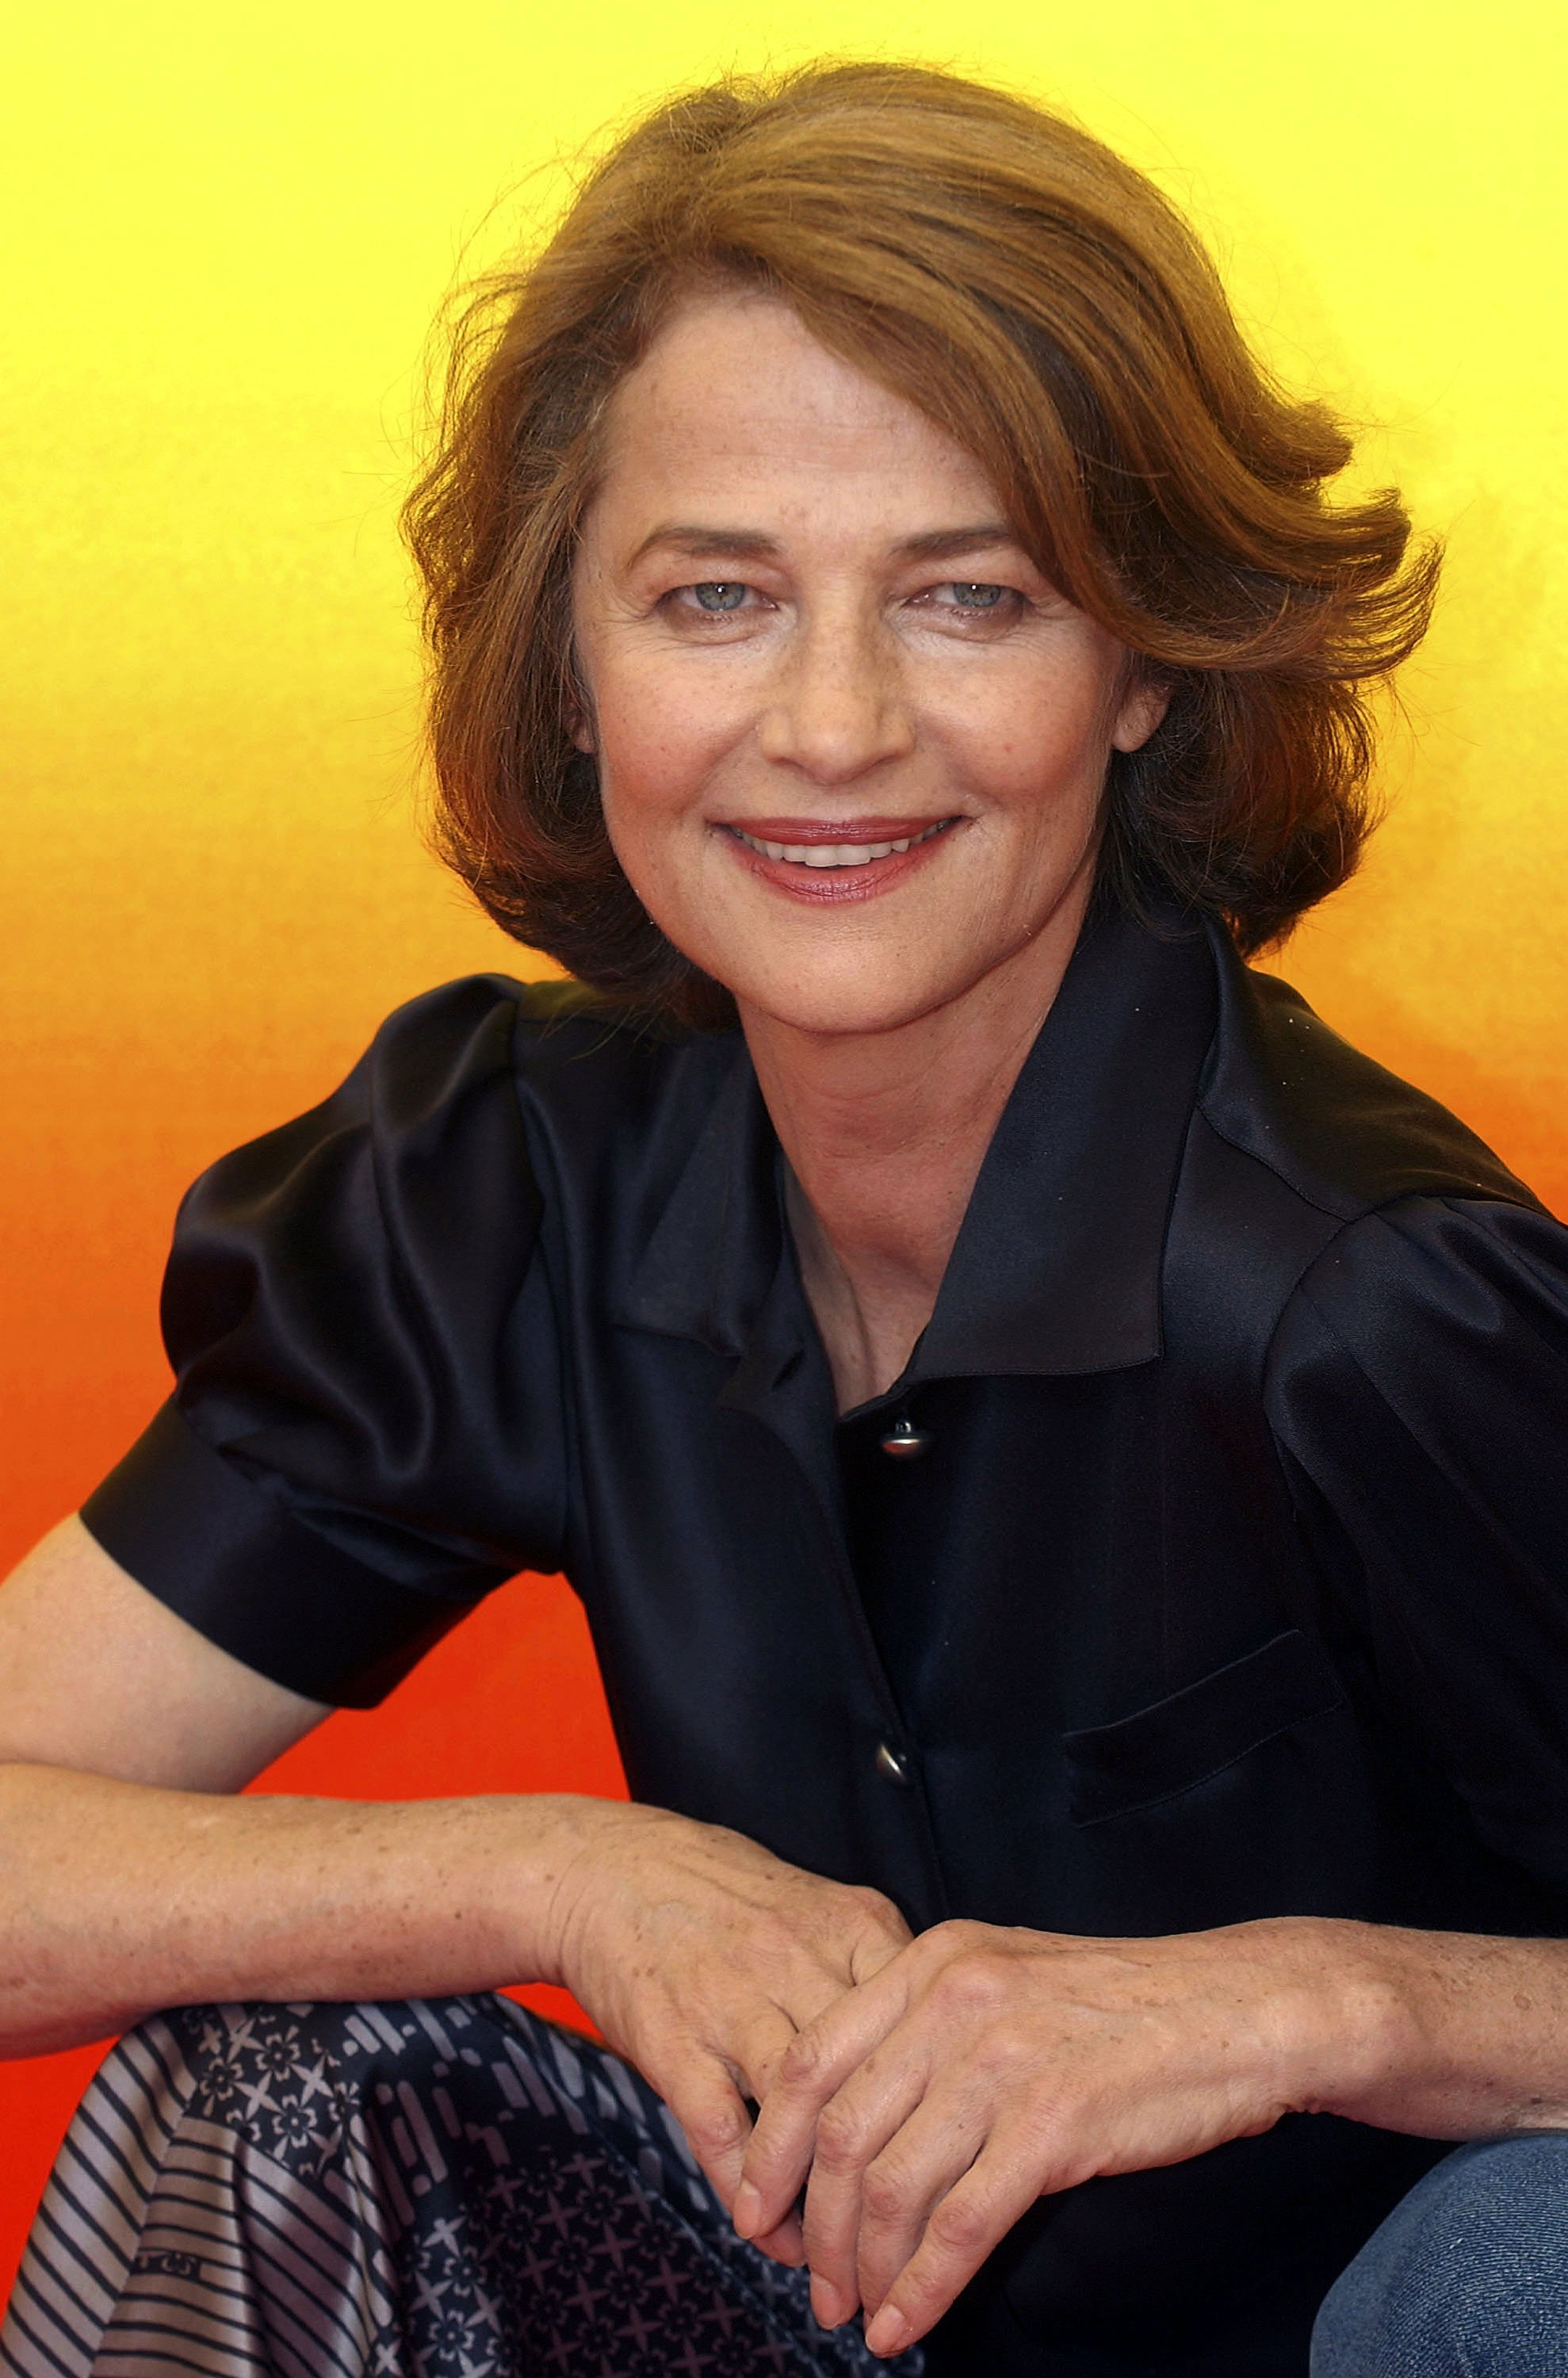 Actress Charlotte Rampling attends the "Le Chiavi Di Casa" Photocall/Premiere at the 61st Venice Film Festival on September 9, 2004 in Venice, Italy.